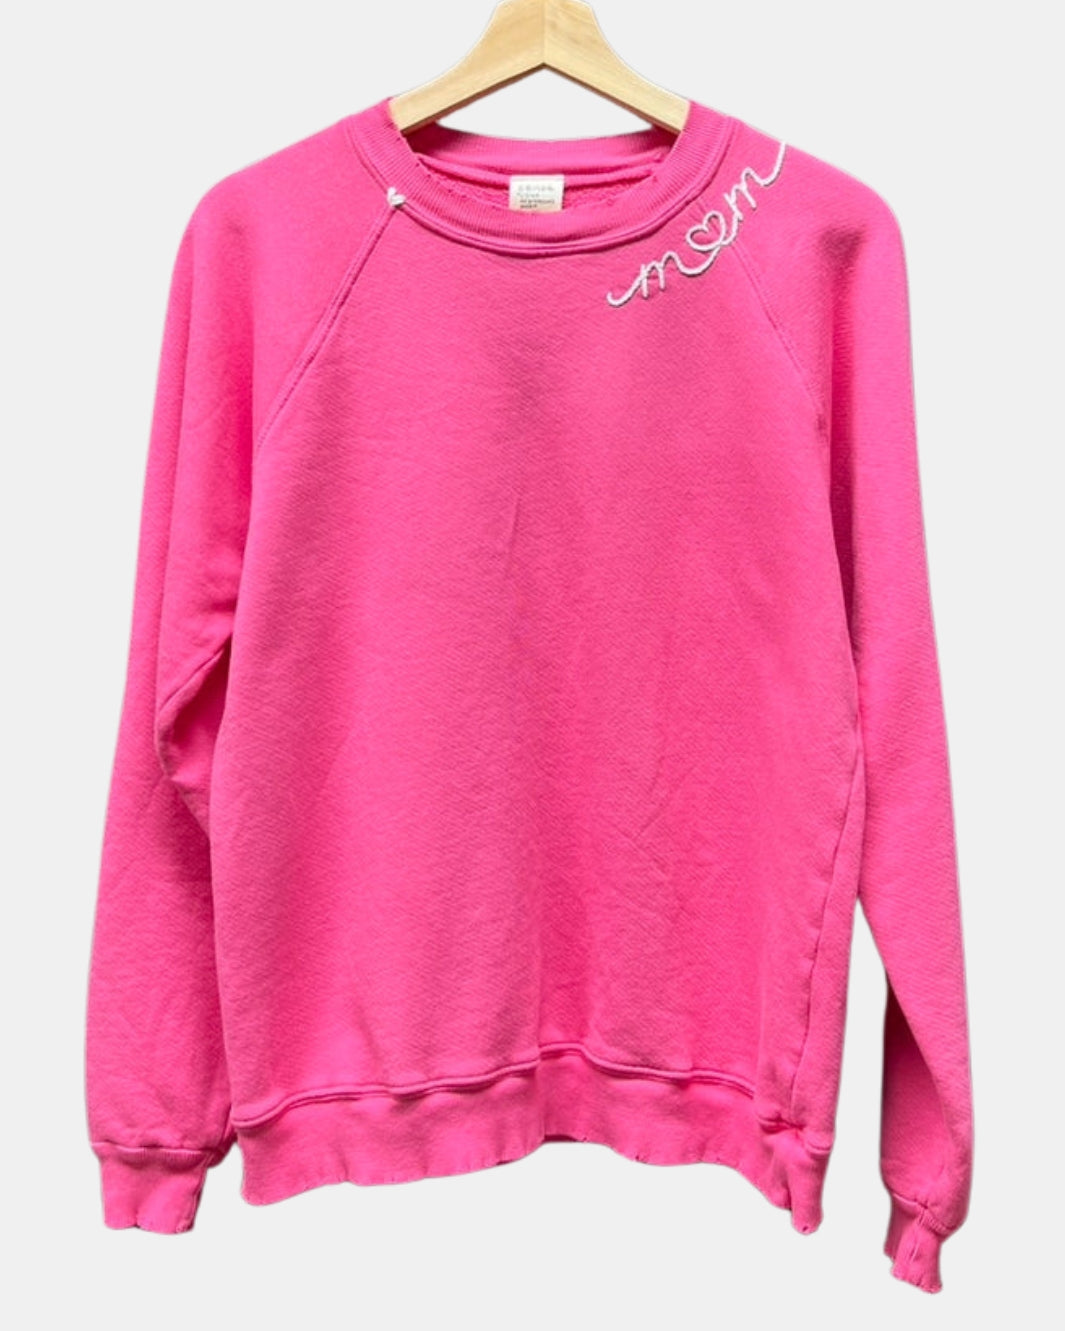 MOM HEART CREWNECK IN PINK - Romi Boutique